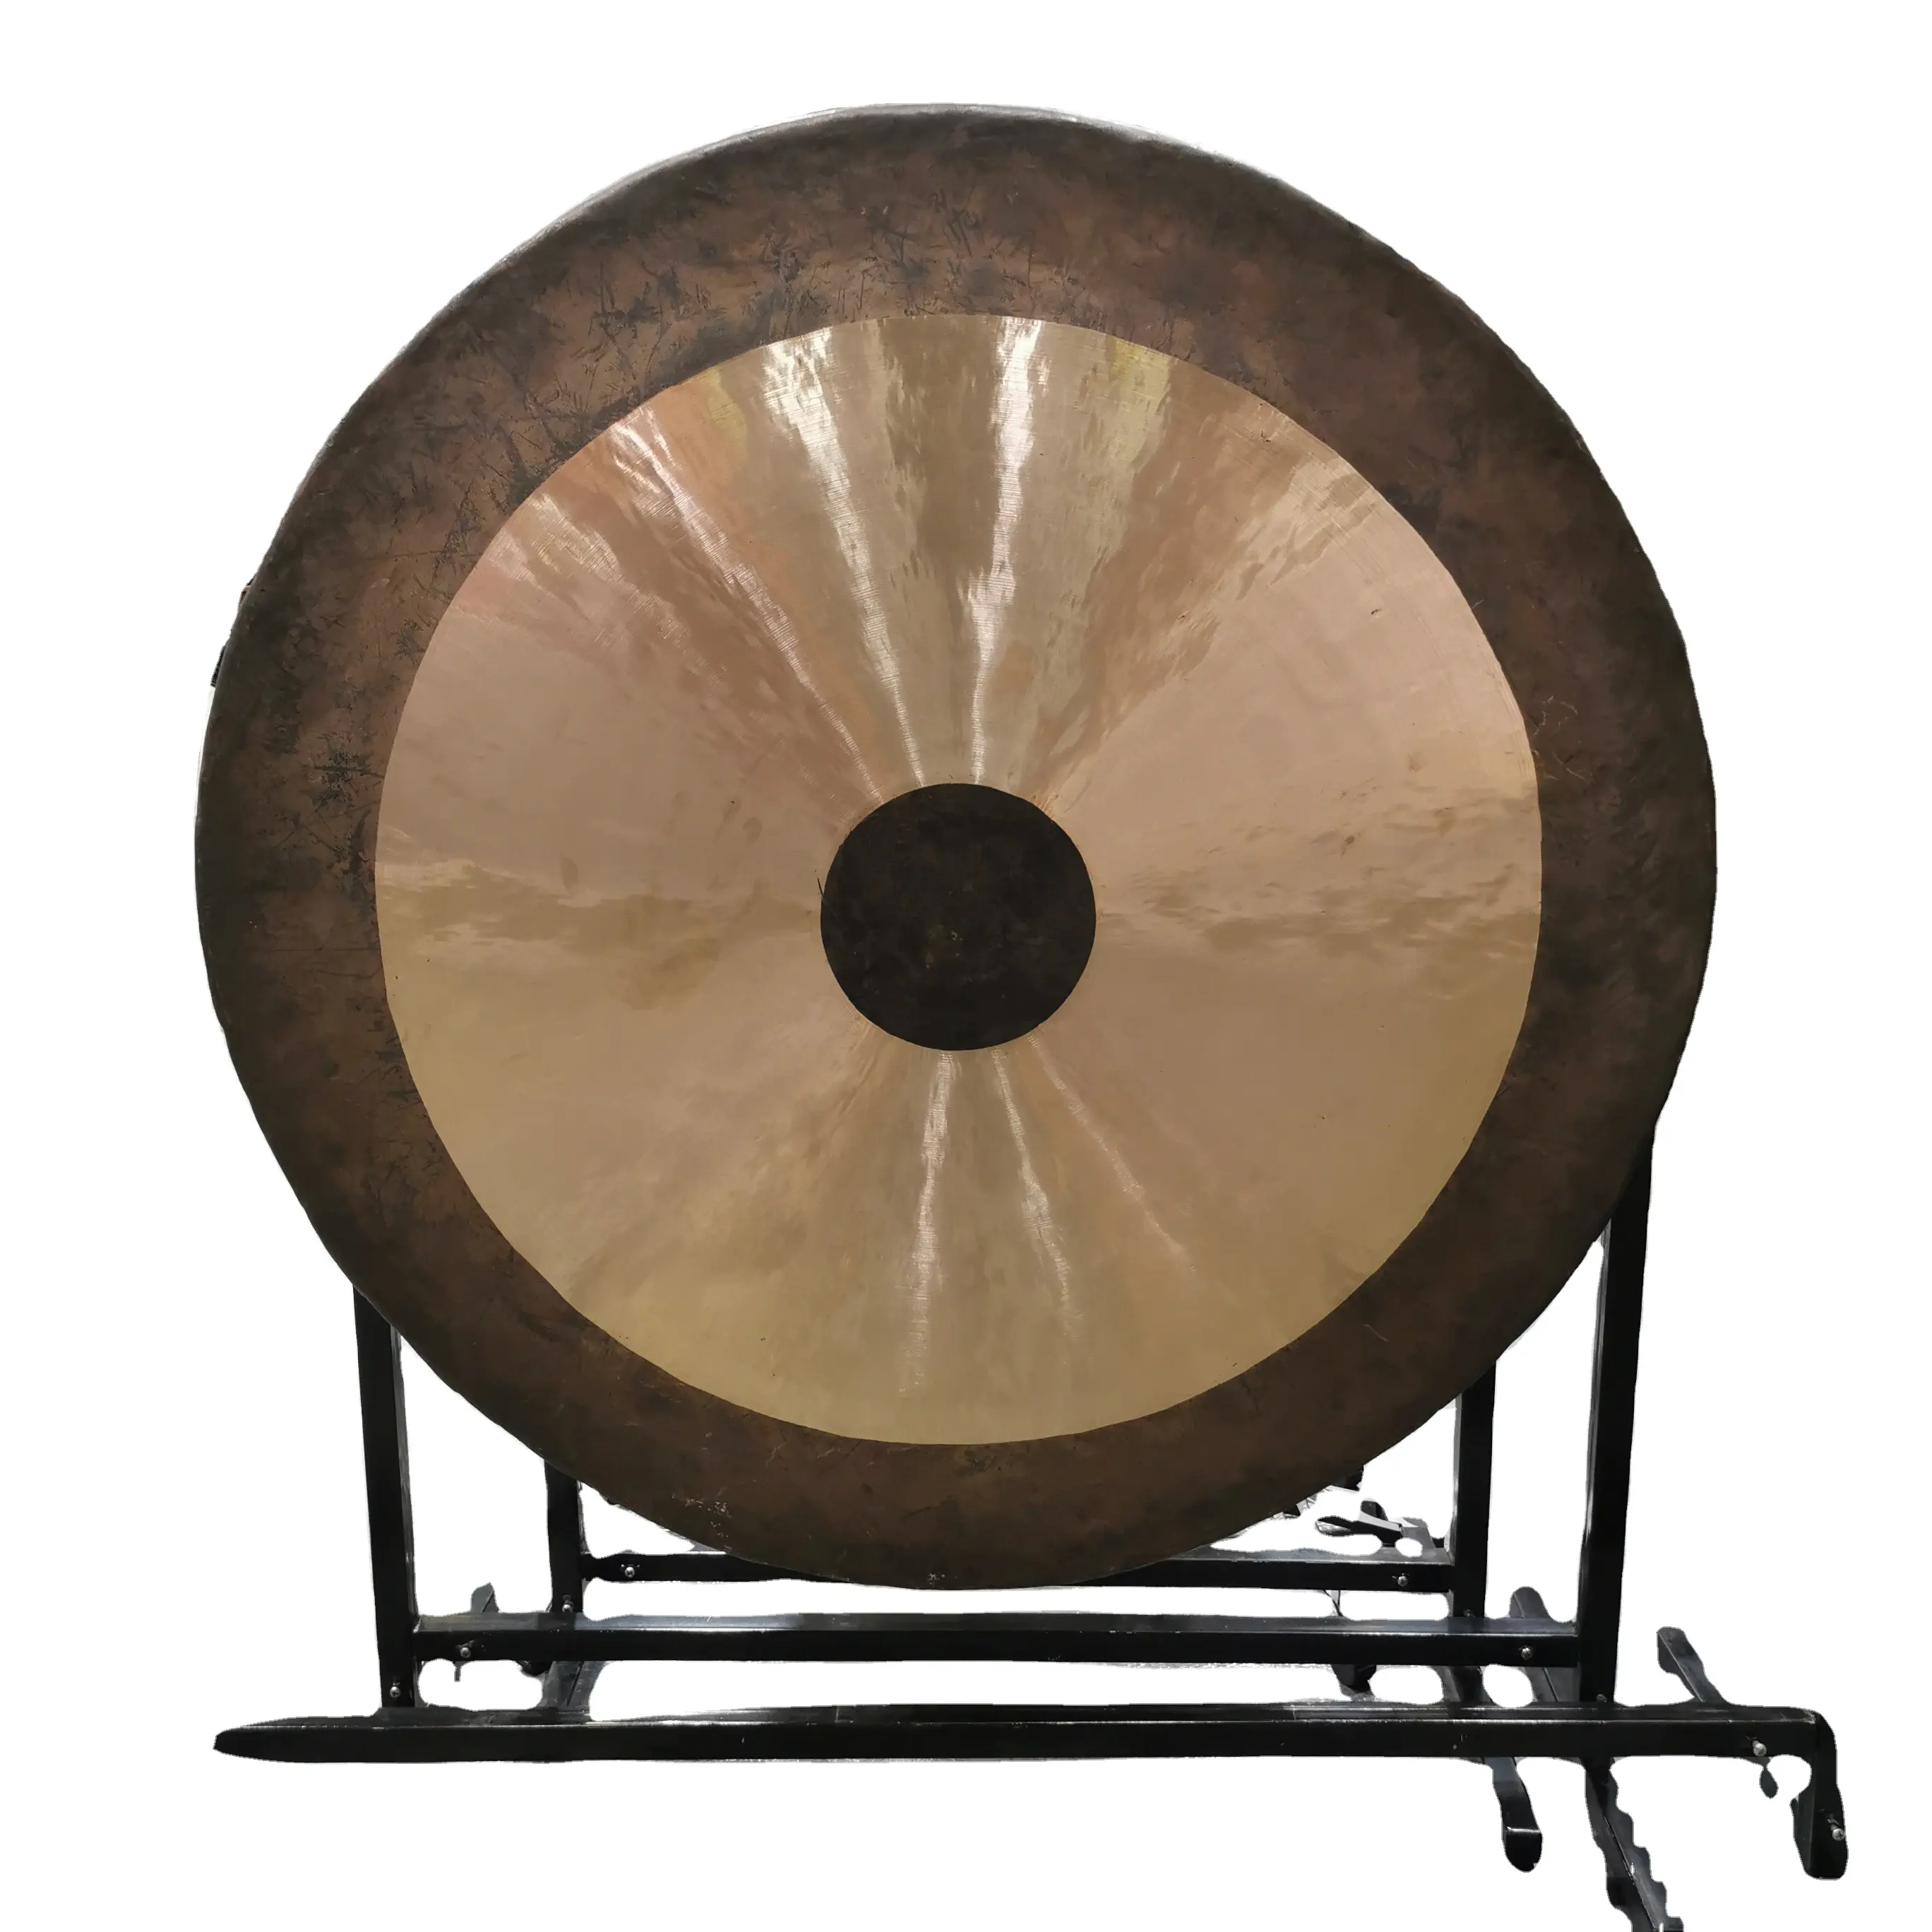 "Chinese Traditionele Handgemaakte Staande <span class=keywords><strong>Gong</strong></span> 50" Chau <span class=keywords><strong>Gong</strong></span>